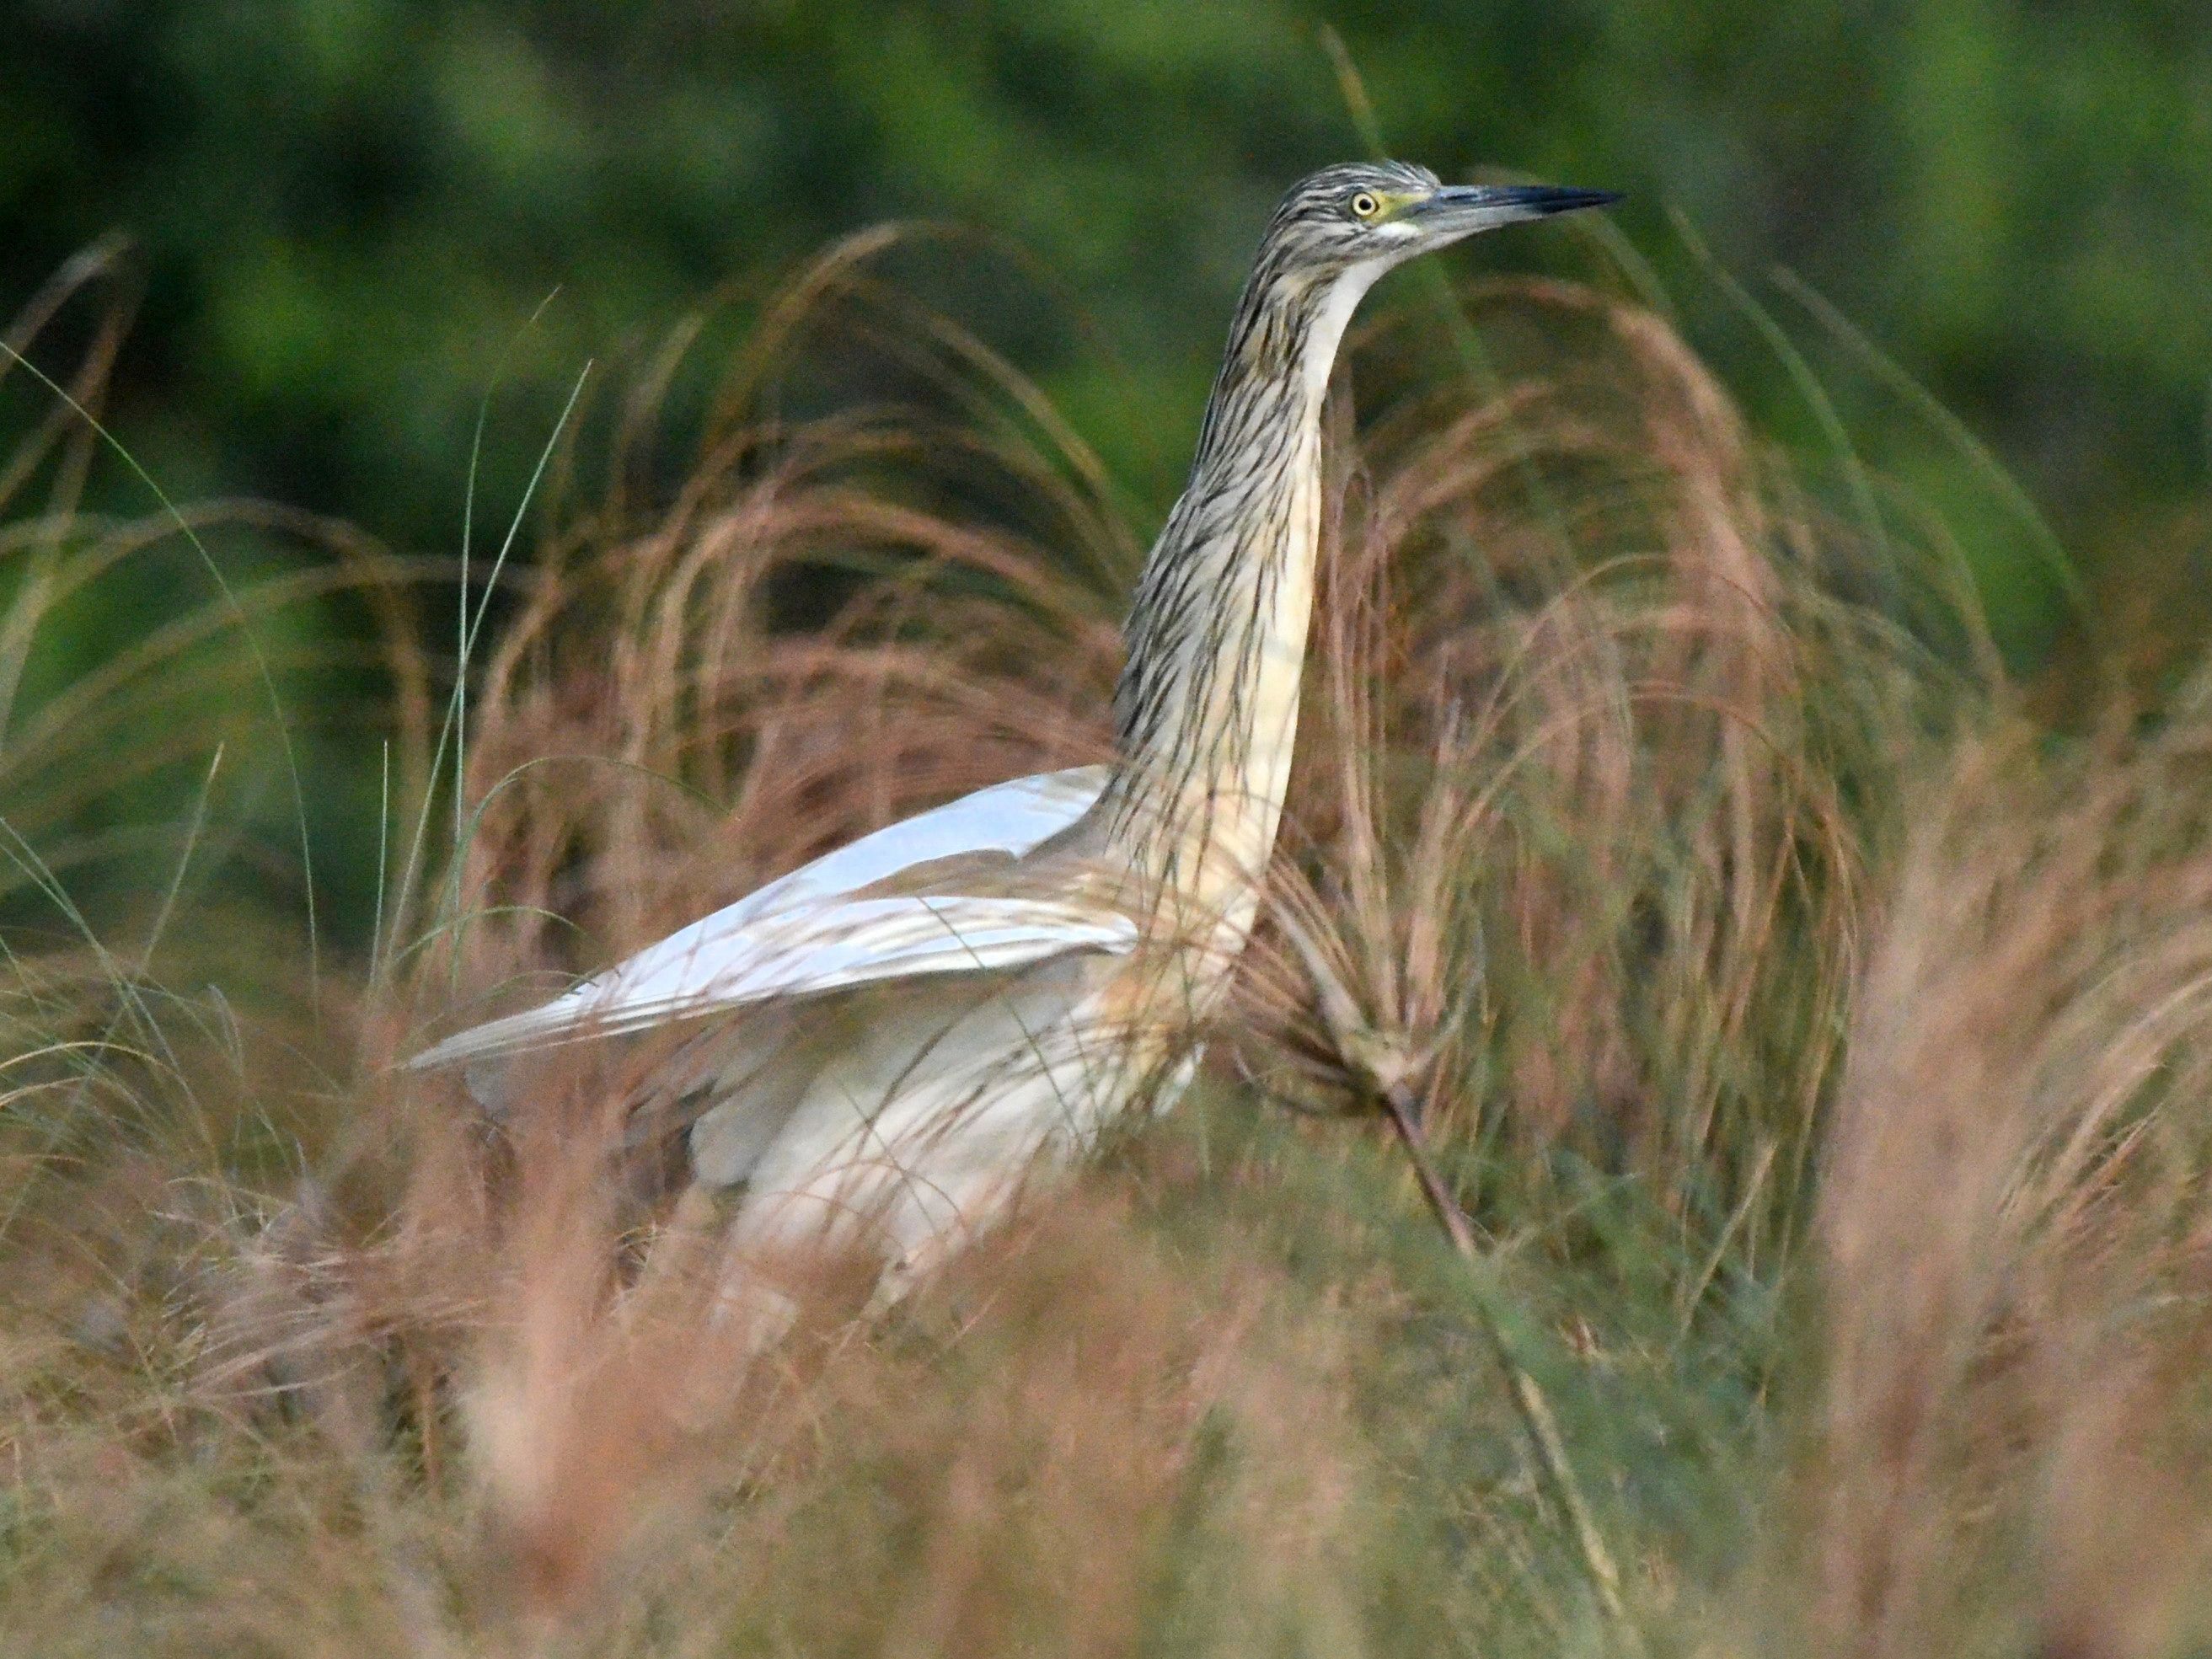 Click picture to see more Squacco Herons.